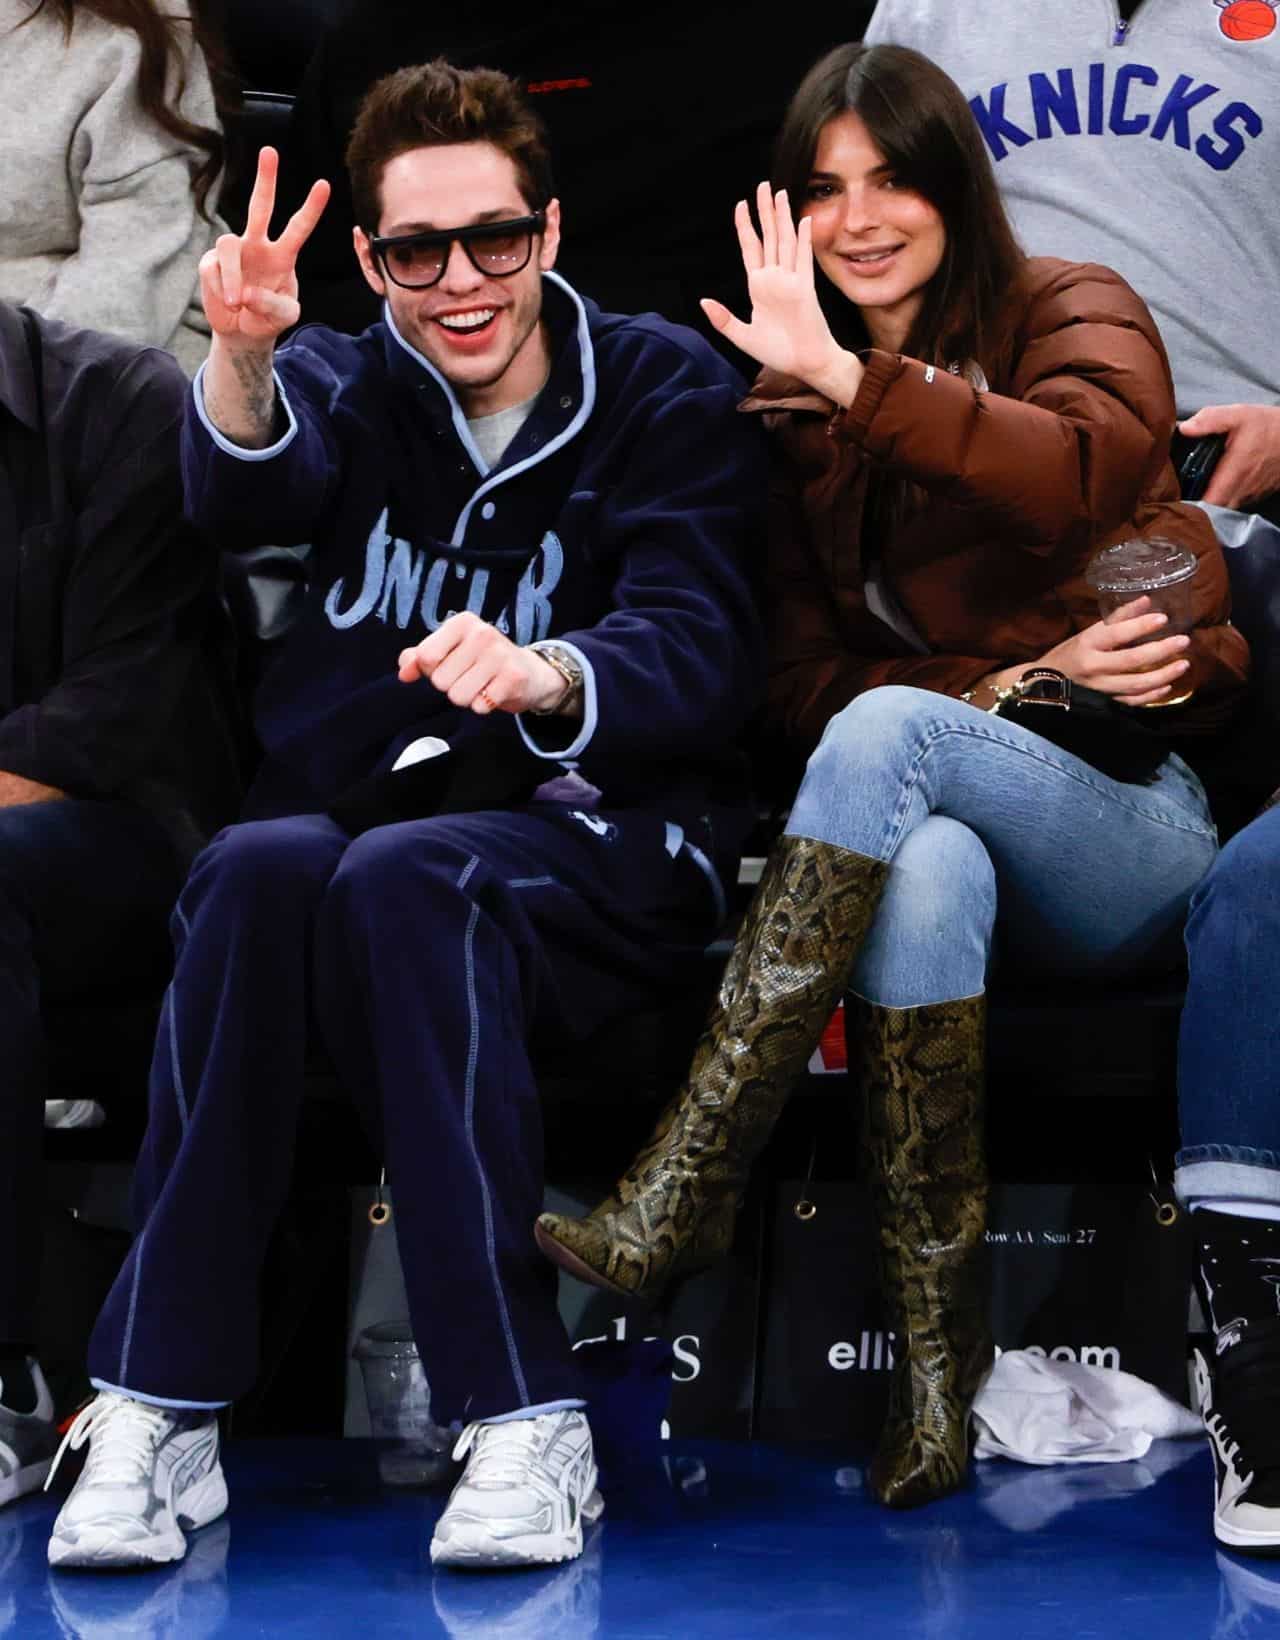 Emily Ratajkowski and Pete Revealed Their Romance at an NBA Game in NY